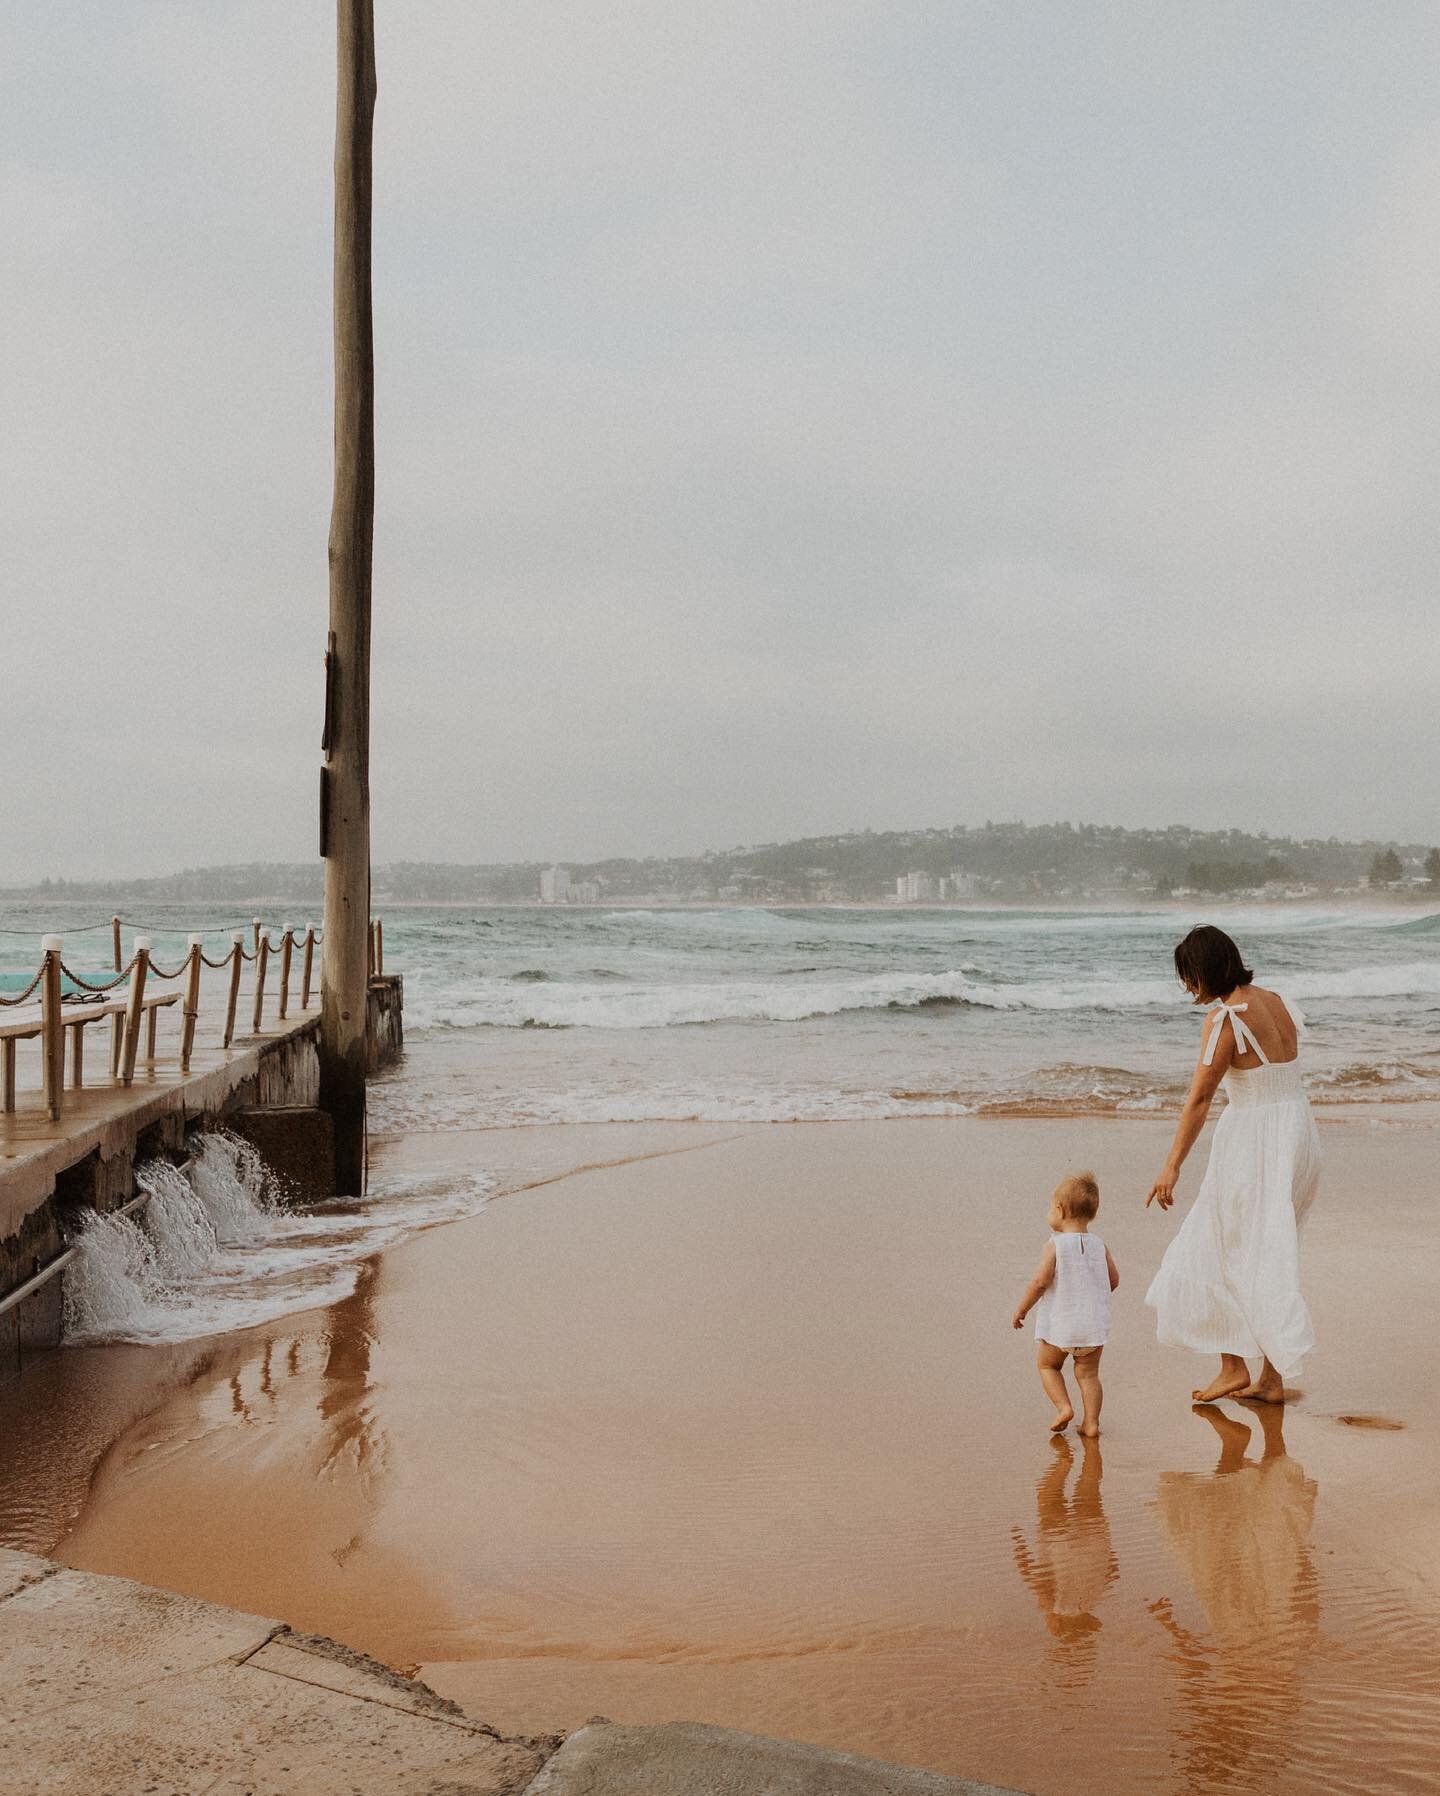 This family shoot was all about having fun with their toddler, who had a blast playing with her mum and dad at the beach while I simply photographed the sweet moments that unfolded in front of me. 

If you&rsquo;re interested in having your photos ta